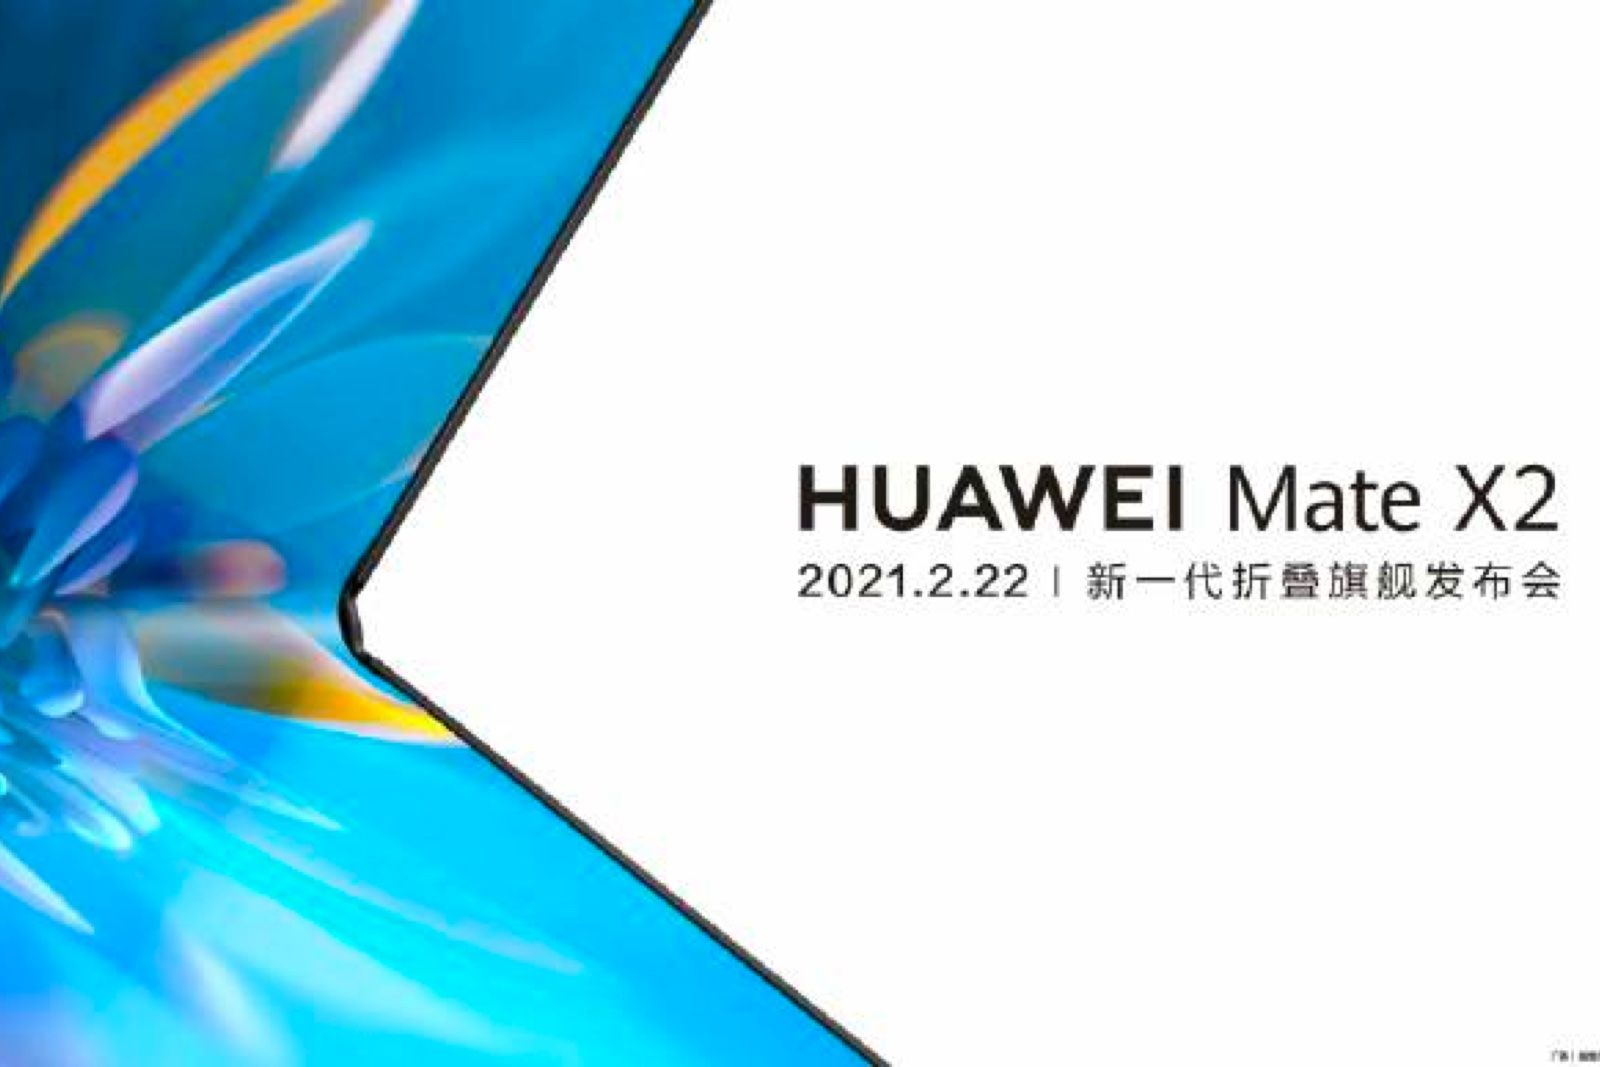 Huawei Mate X2 is a new foldable phone being announced on 22 February photo 1